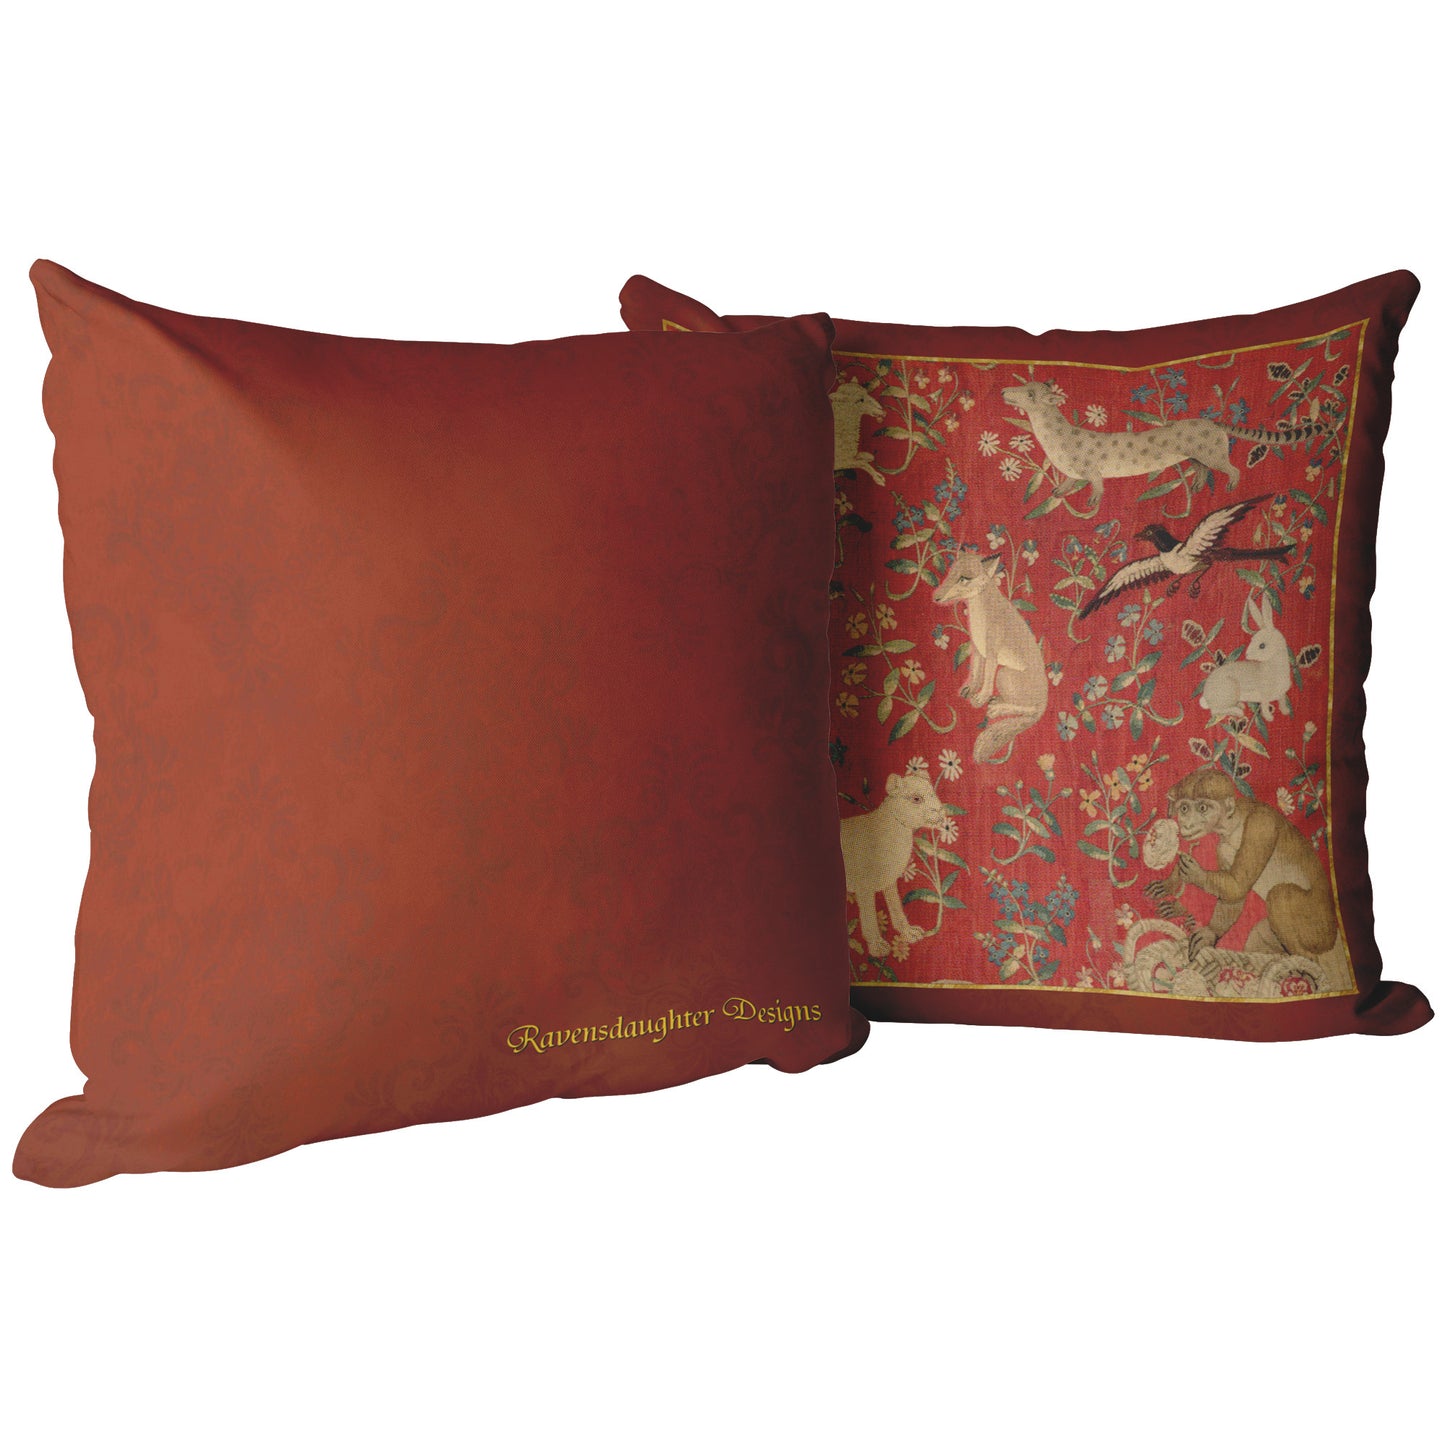 Lady and Unicorn Menagerie Throw Pillow